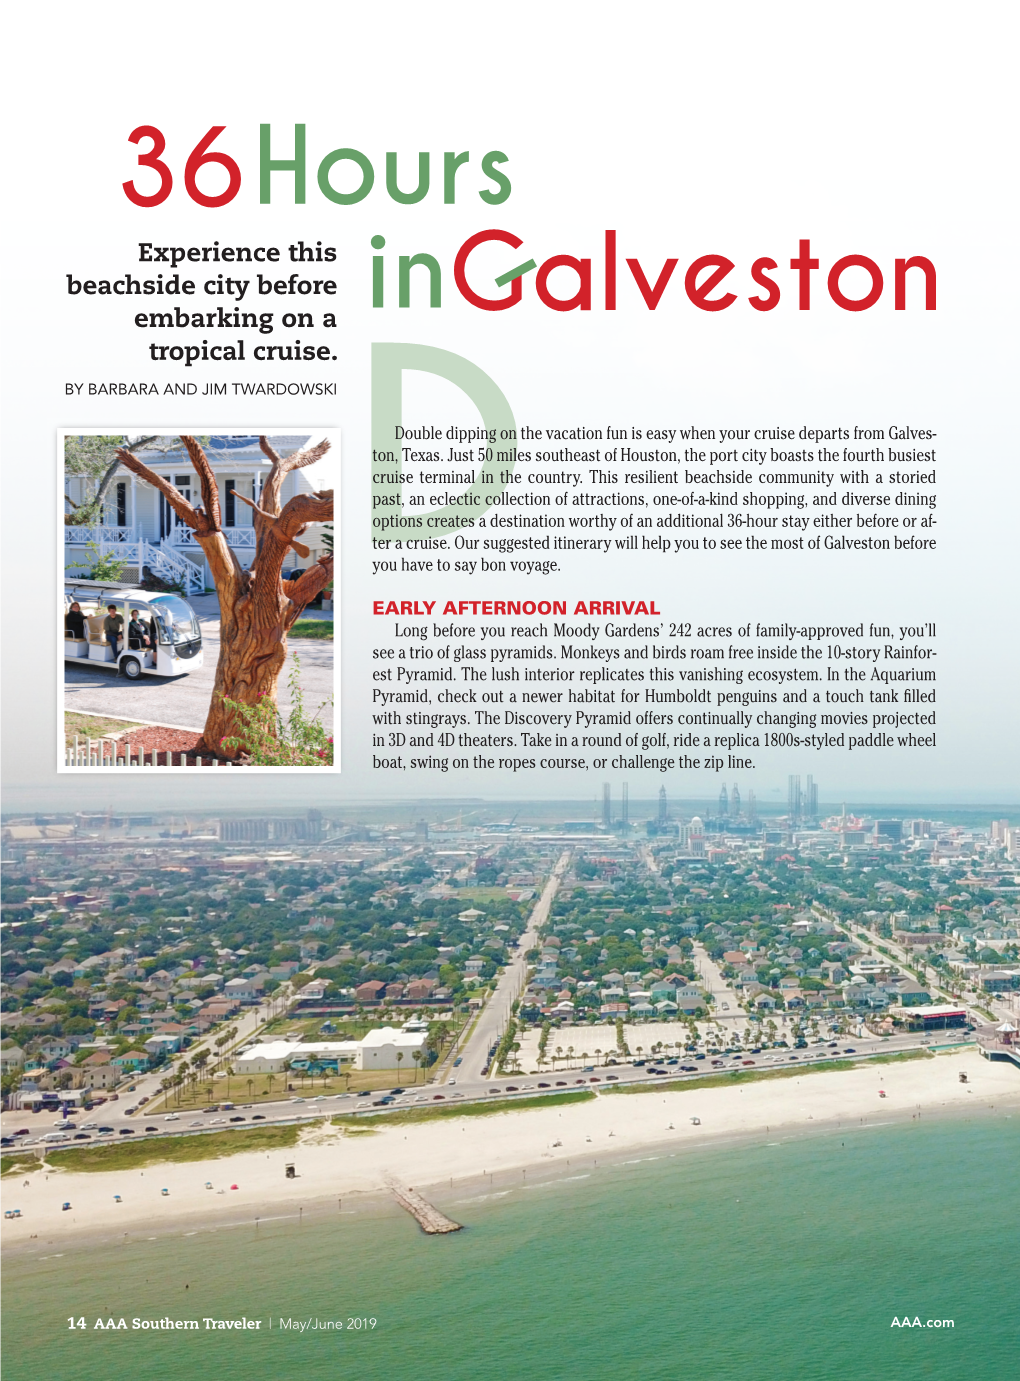 AAA SOUTHERN TRAVELER: 36 Hours in Galveston